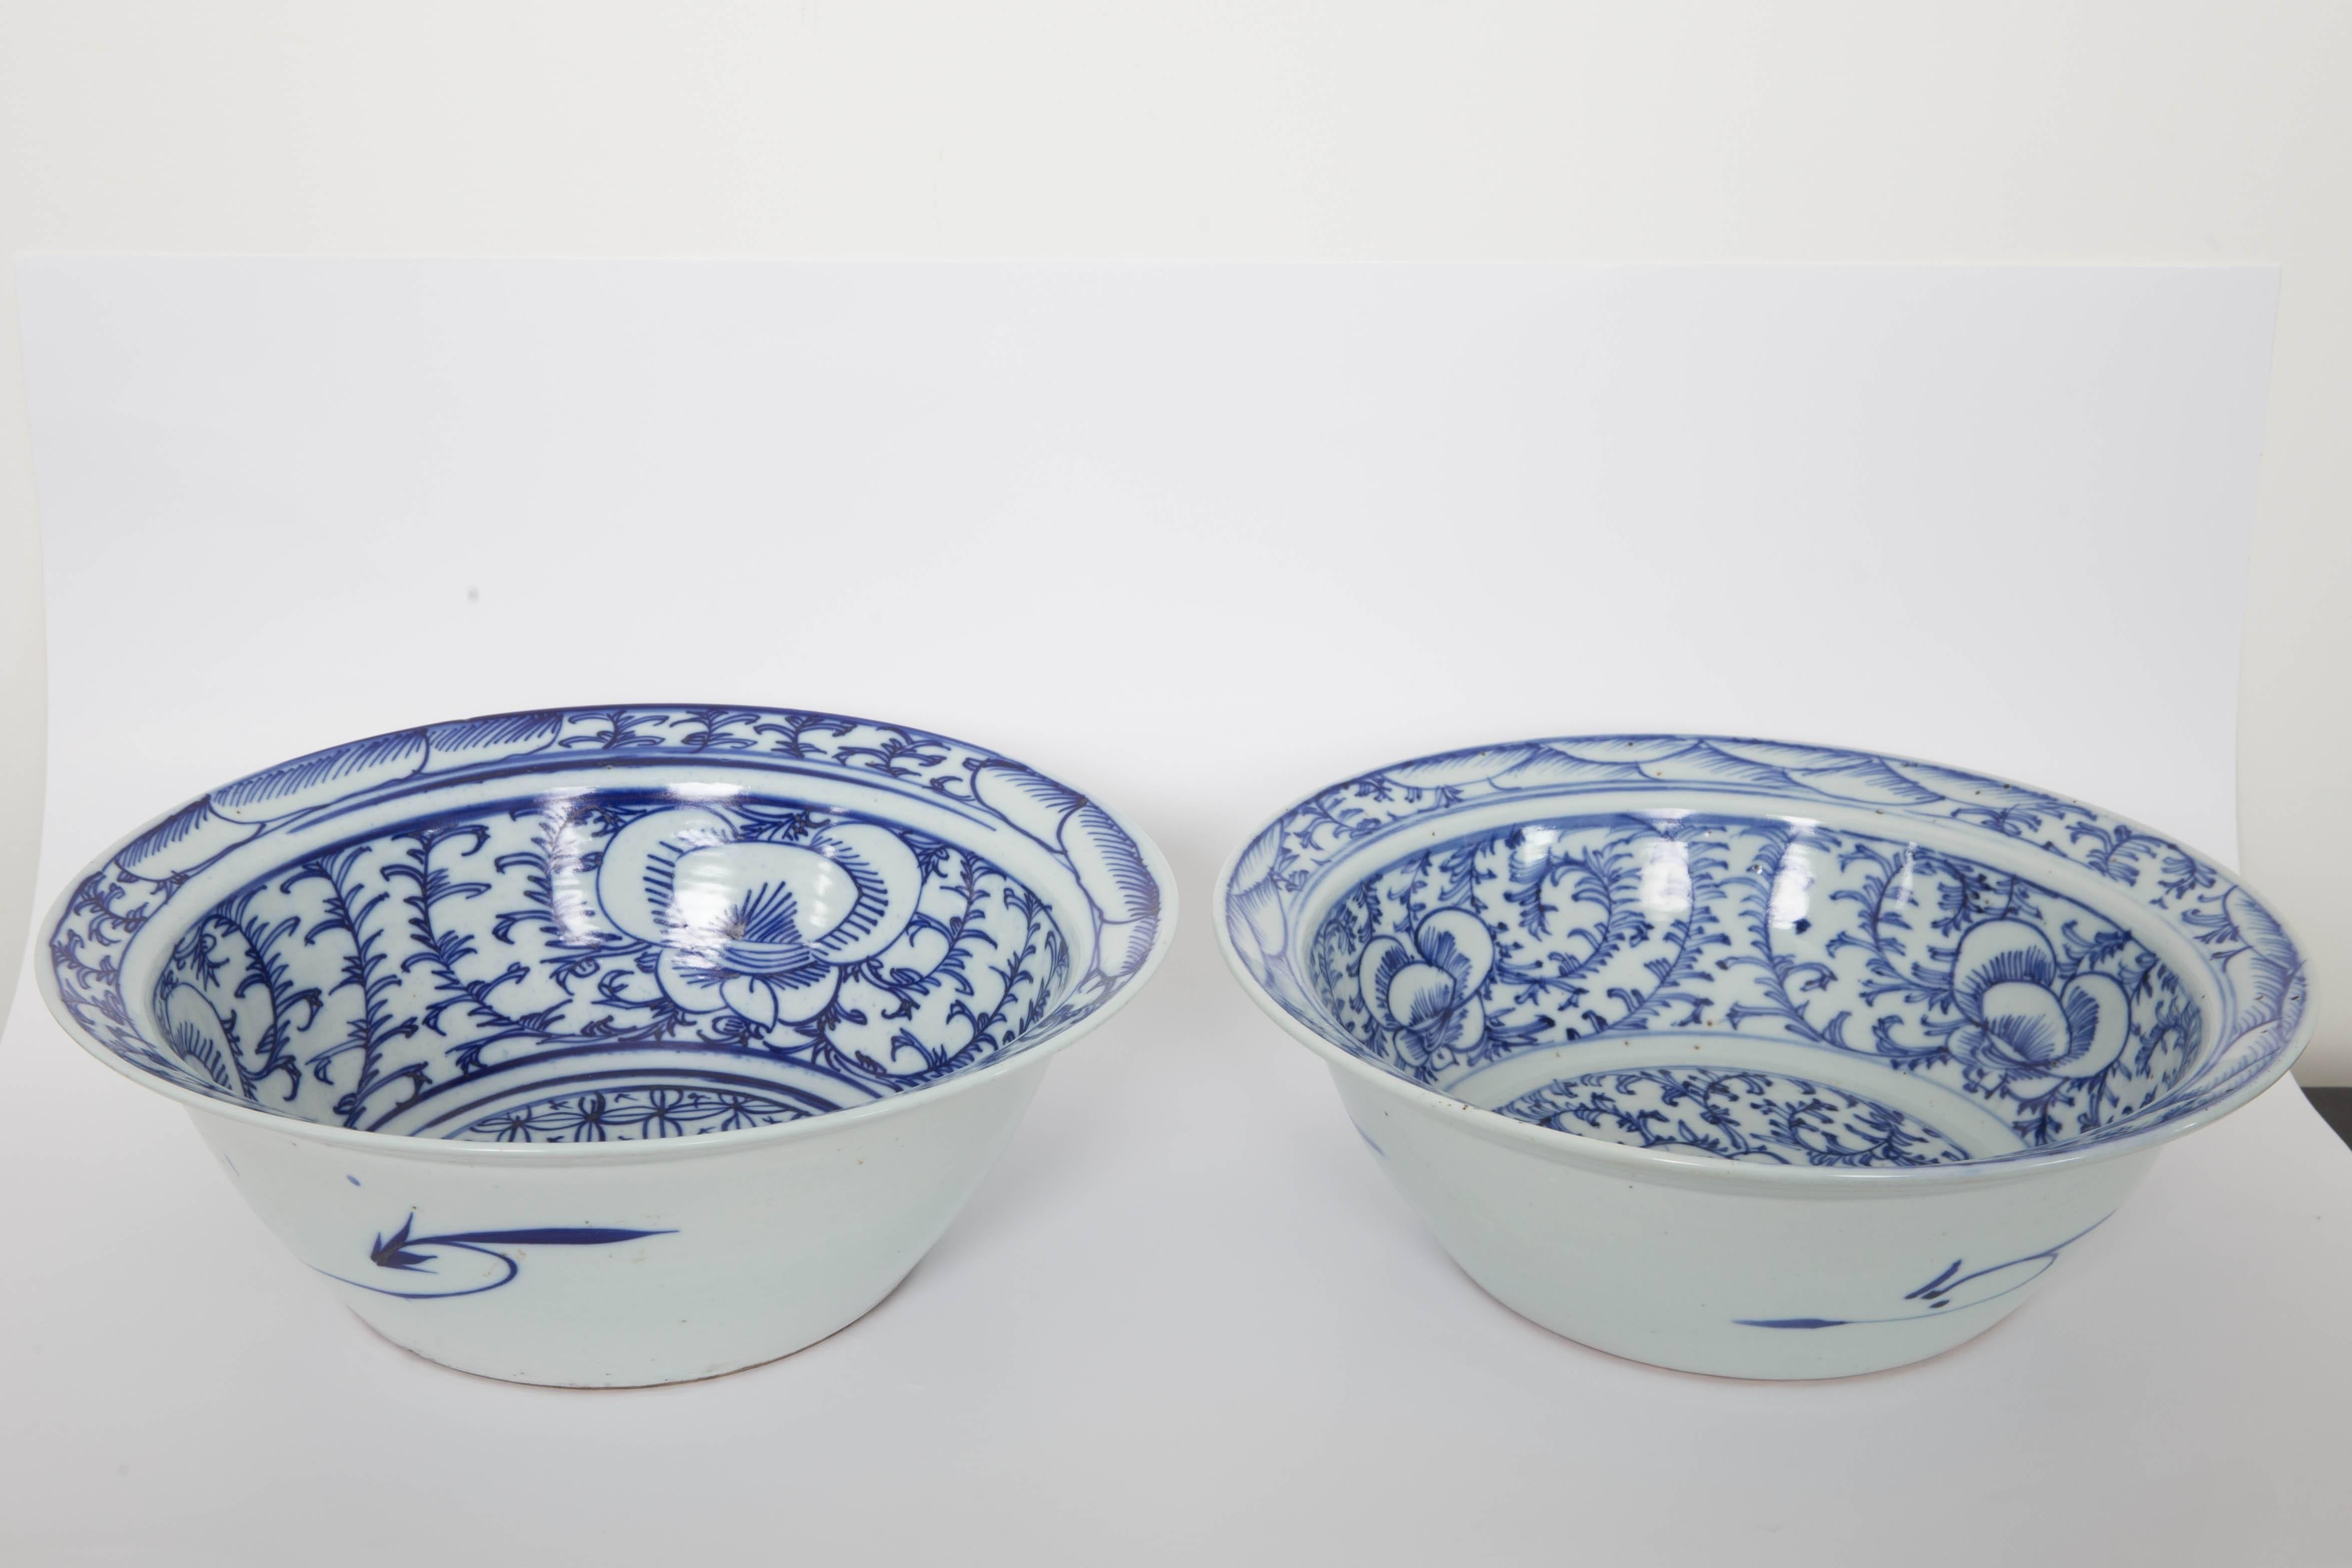 Pair of Chinese blue and white flared rim bowls on handmade wooden stands.